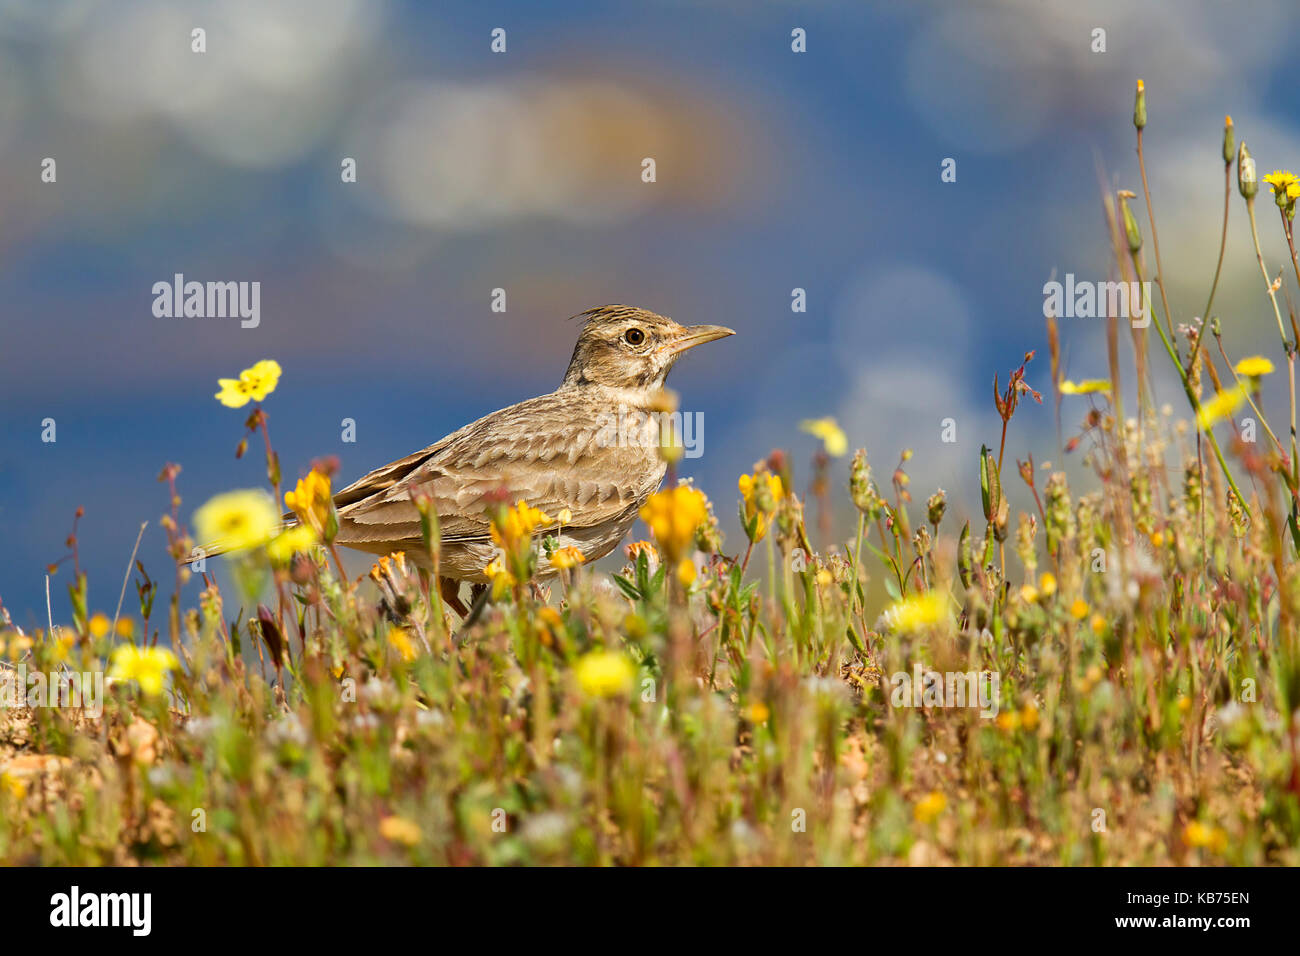 Crested Lark (Galerida cristata) in field with yellow flowers, Spain, Extremadura, Madrigalejo Stock Photo